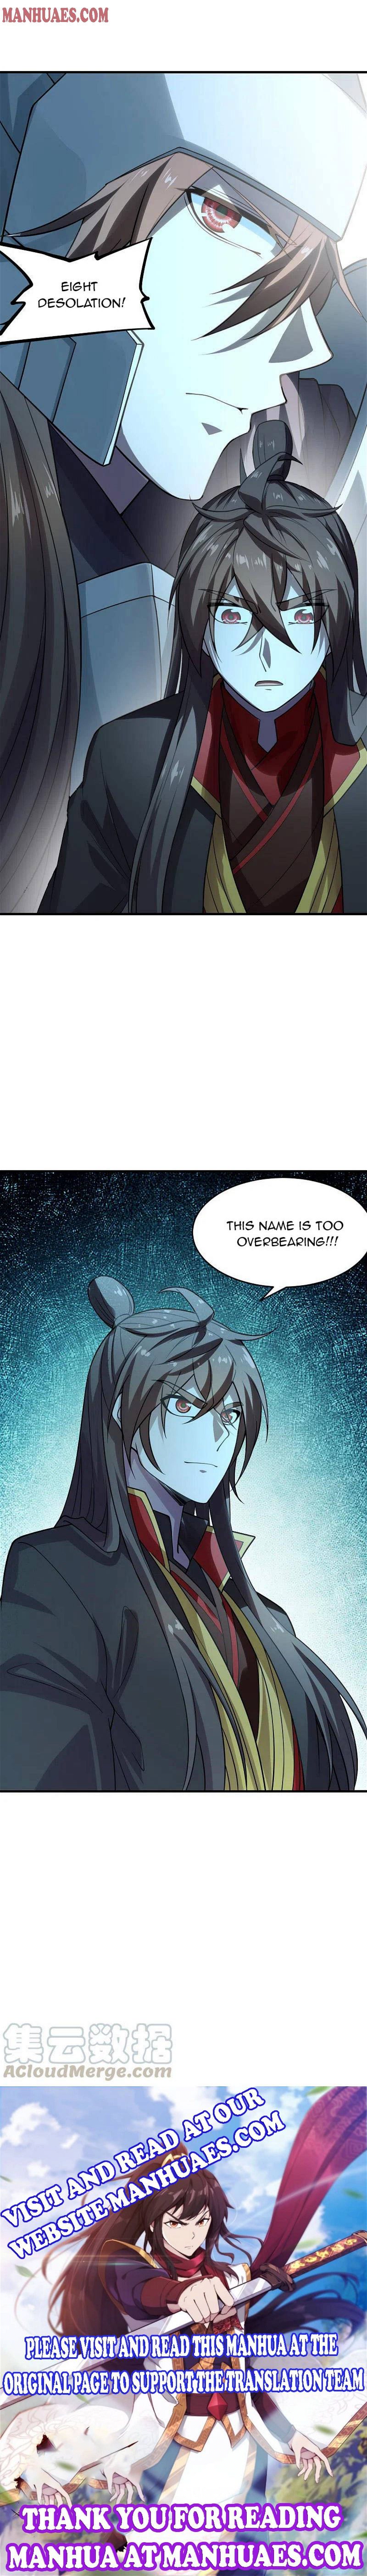 Banished Disciple's Counterattack Chapter 182 page 9